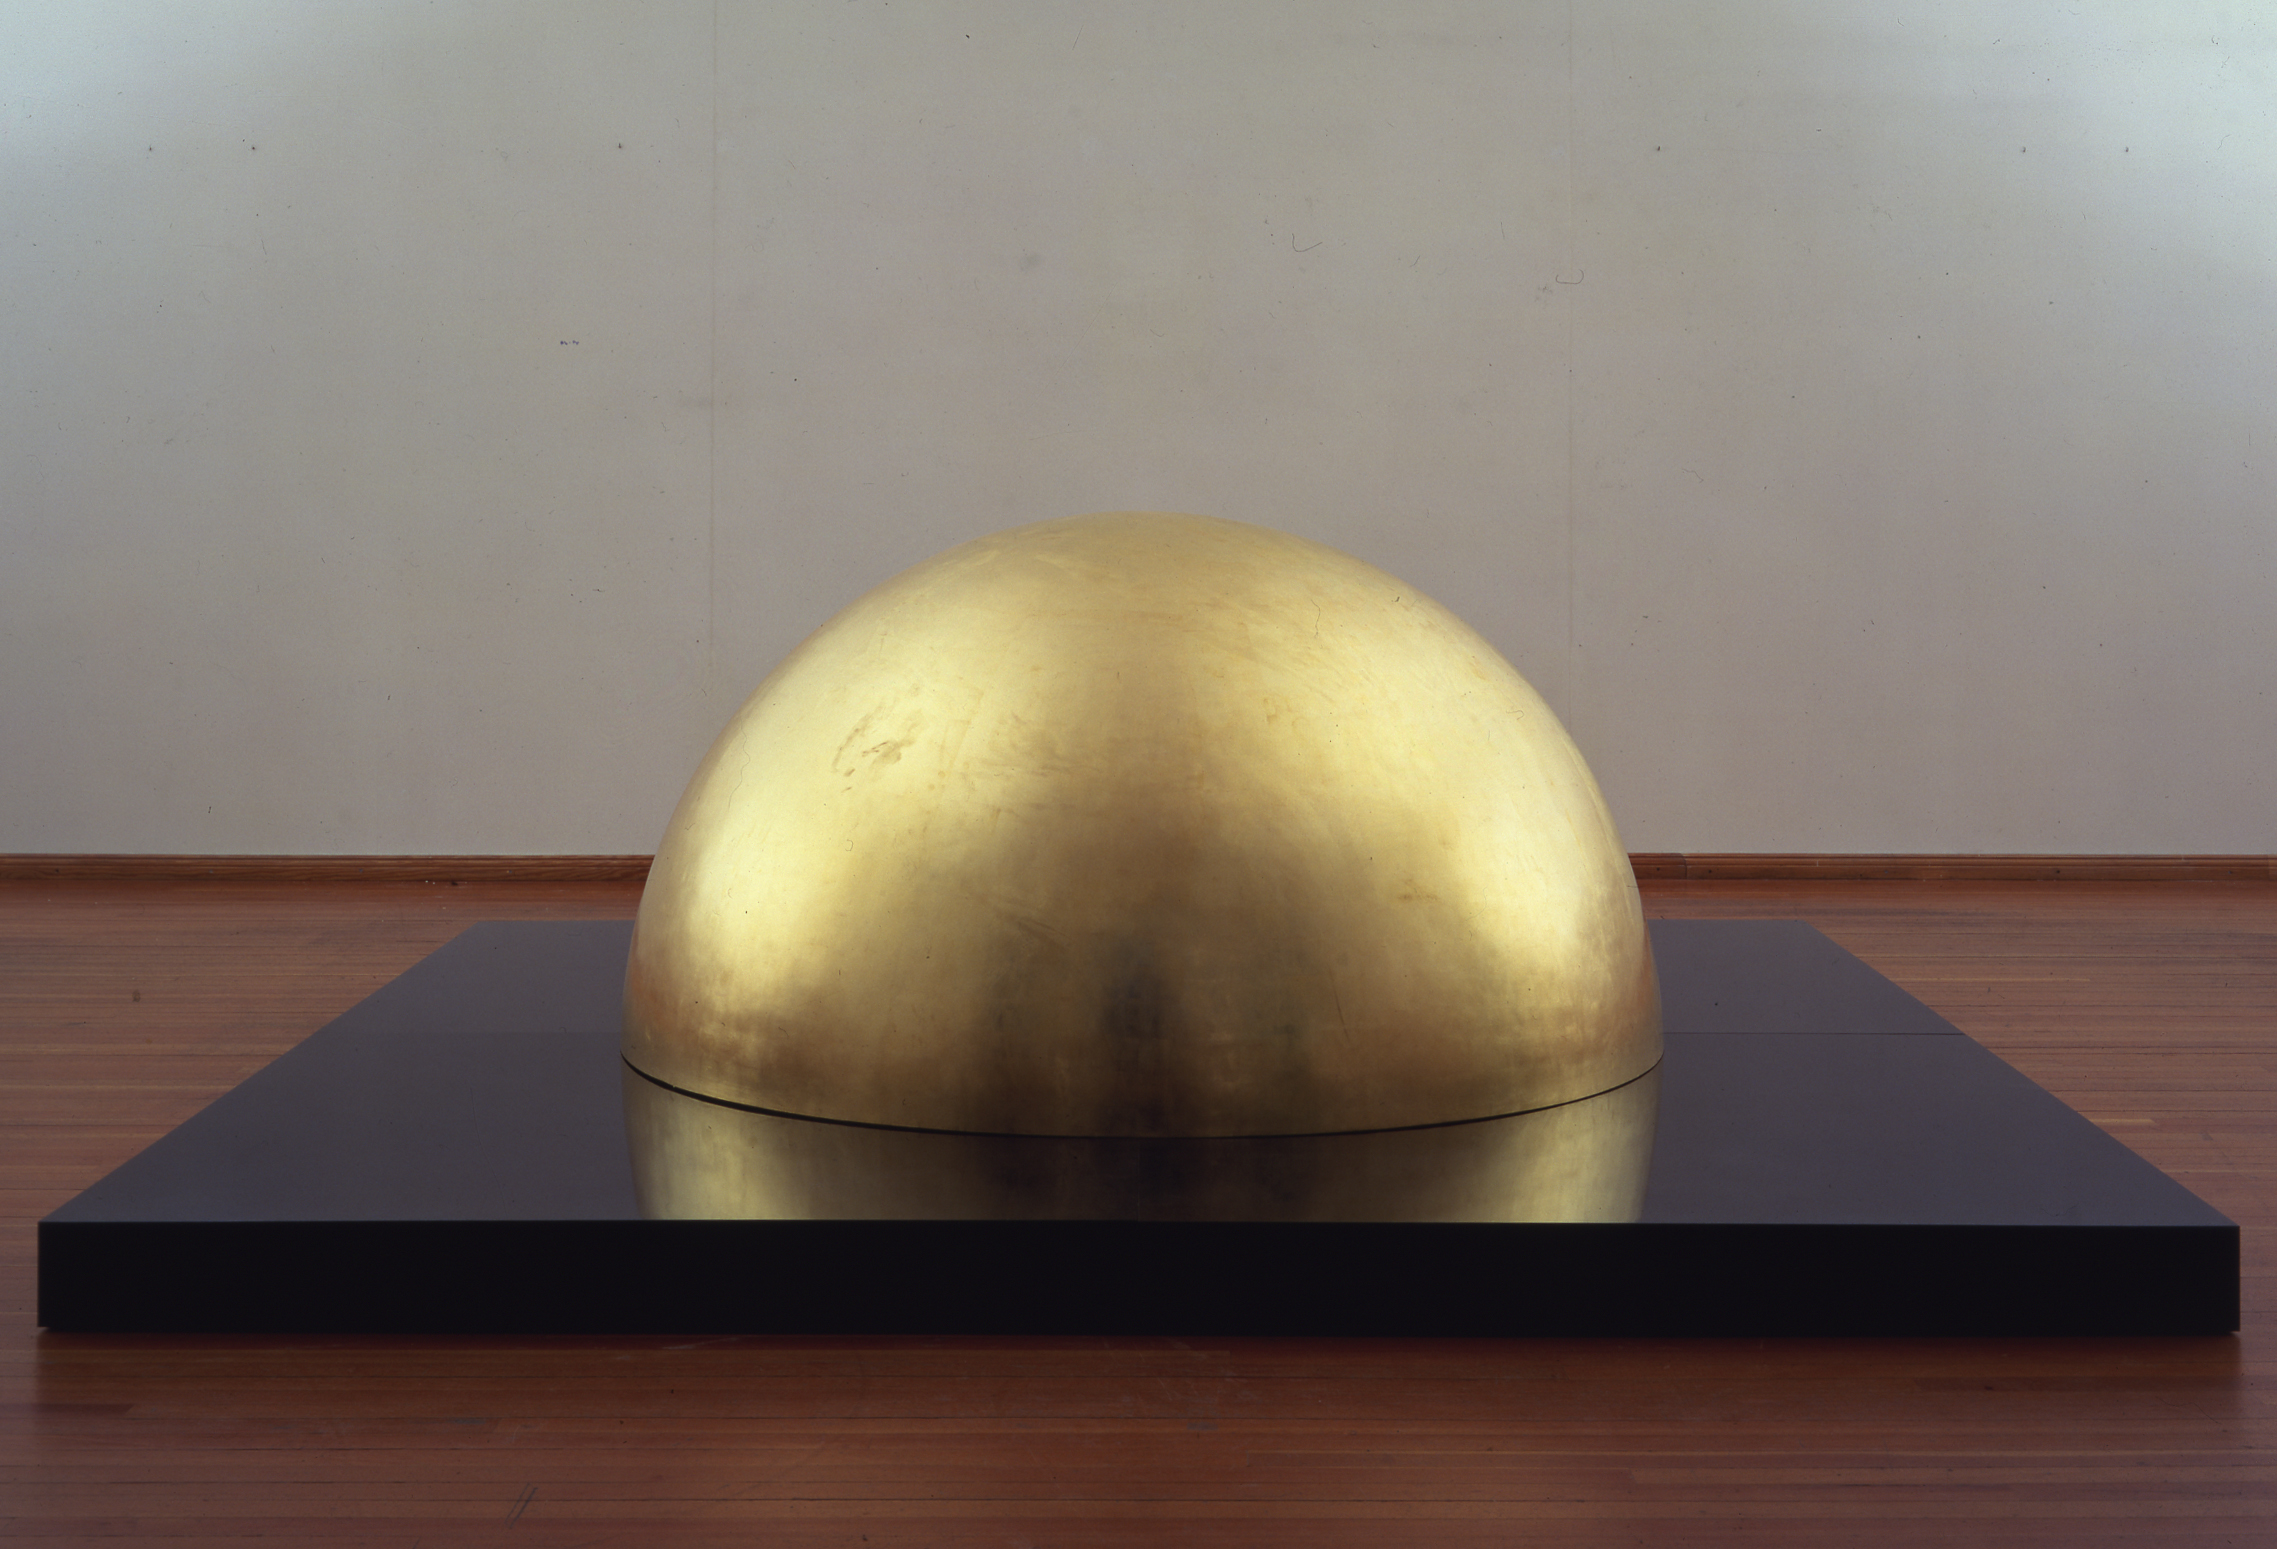 James Lee Byars The Capital of the Golden Tower, 1991 Acciaio inossidabile dorato, legno dipinto 125 x 250 x 250 cm © The Estate of James Lee Byars, courtesy Michael Werner Gallery, New York e Londra Foto Roman März